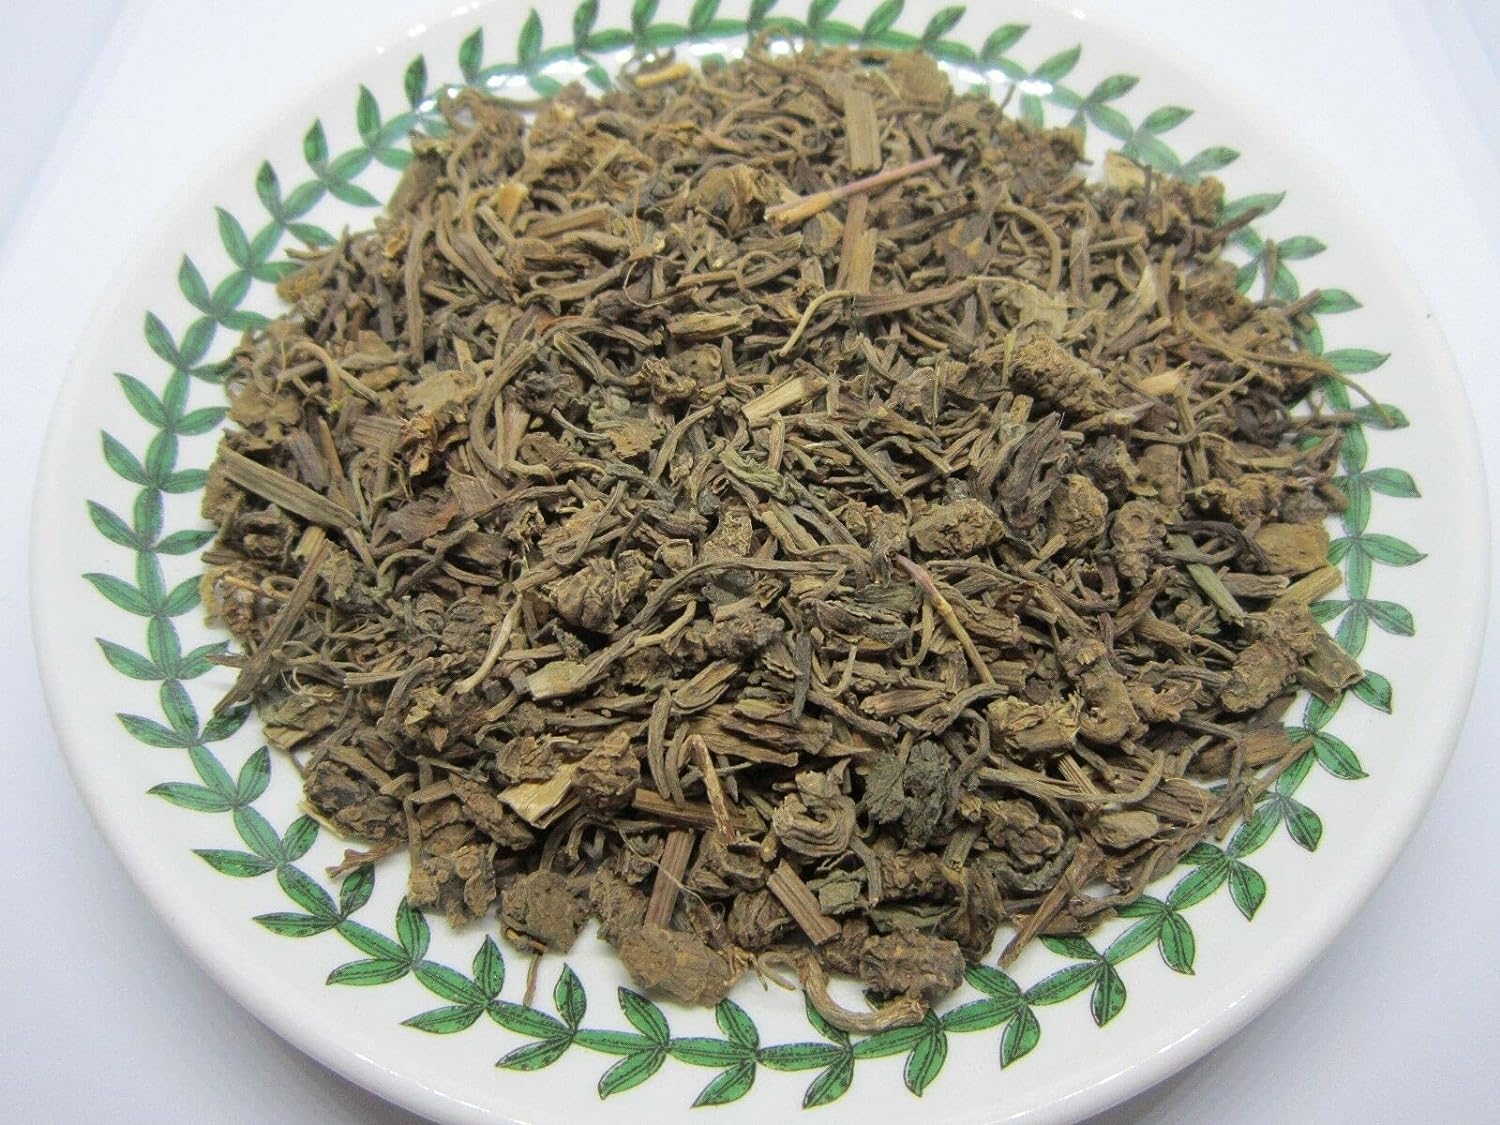 Organic Valerian Root - Valeriana officinalis Dried Loose Root Cut by Nature Tea (1 oz)